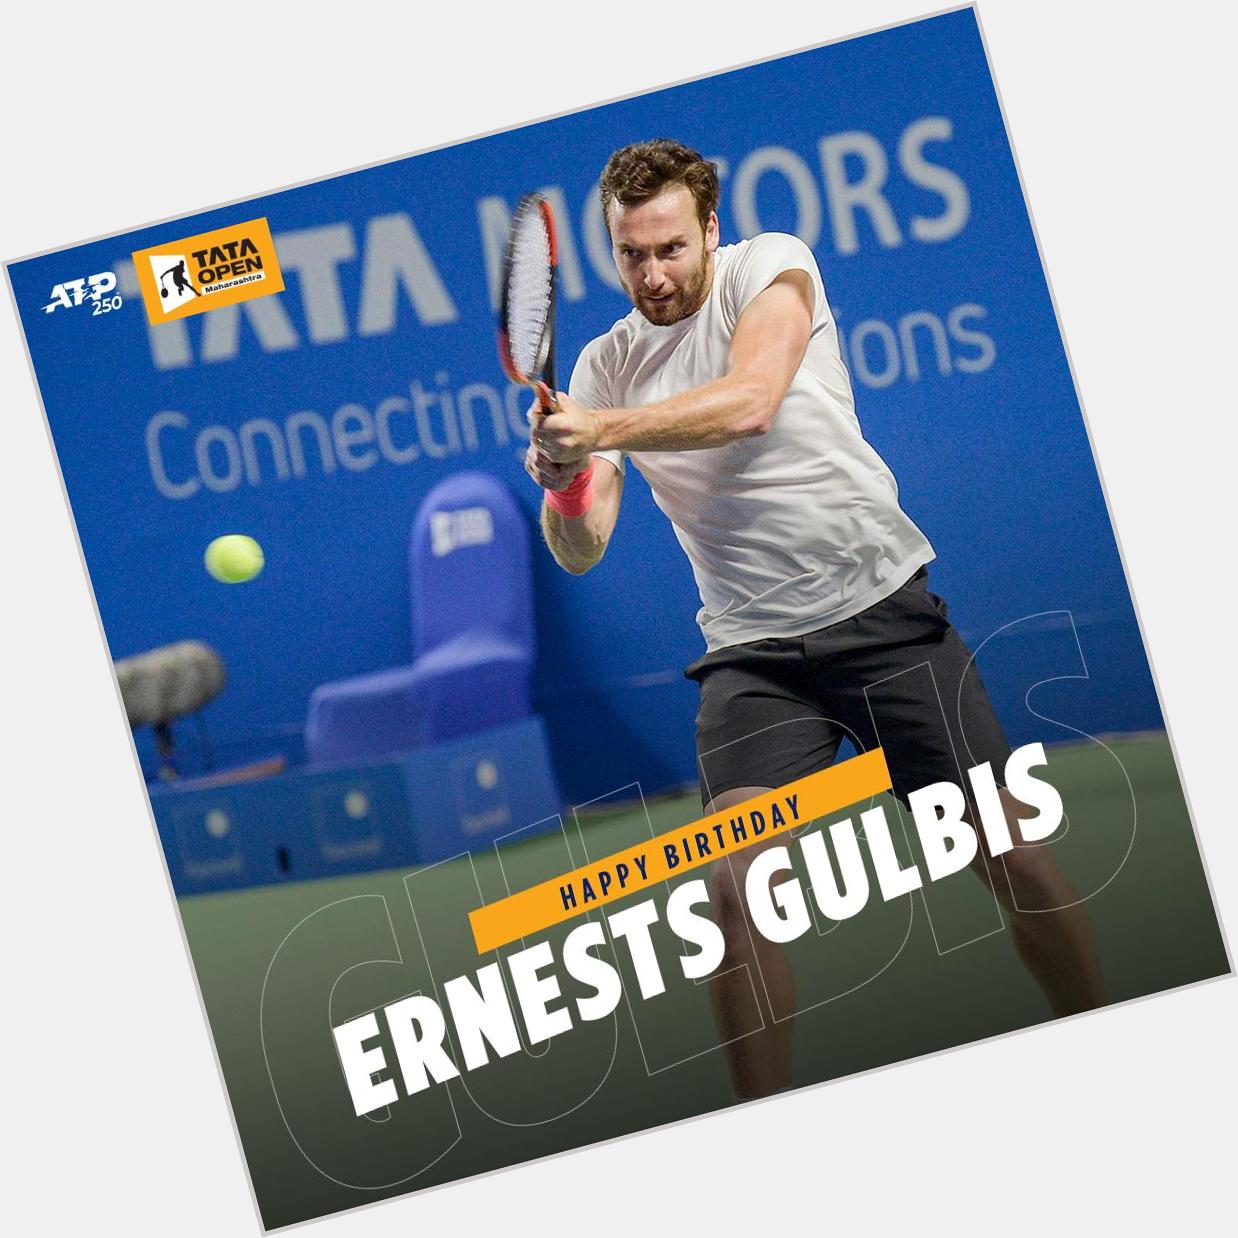 Here\s wishing the Men\s Singles quarterfinalist Ernests Gulbis a very Happy Birthday   